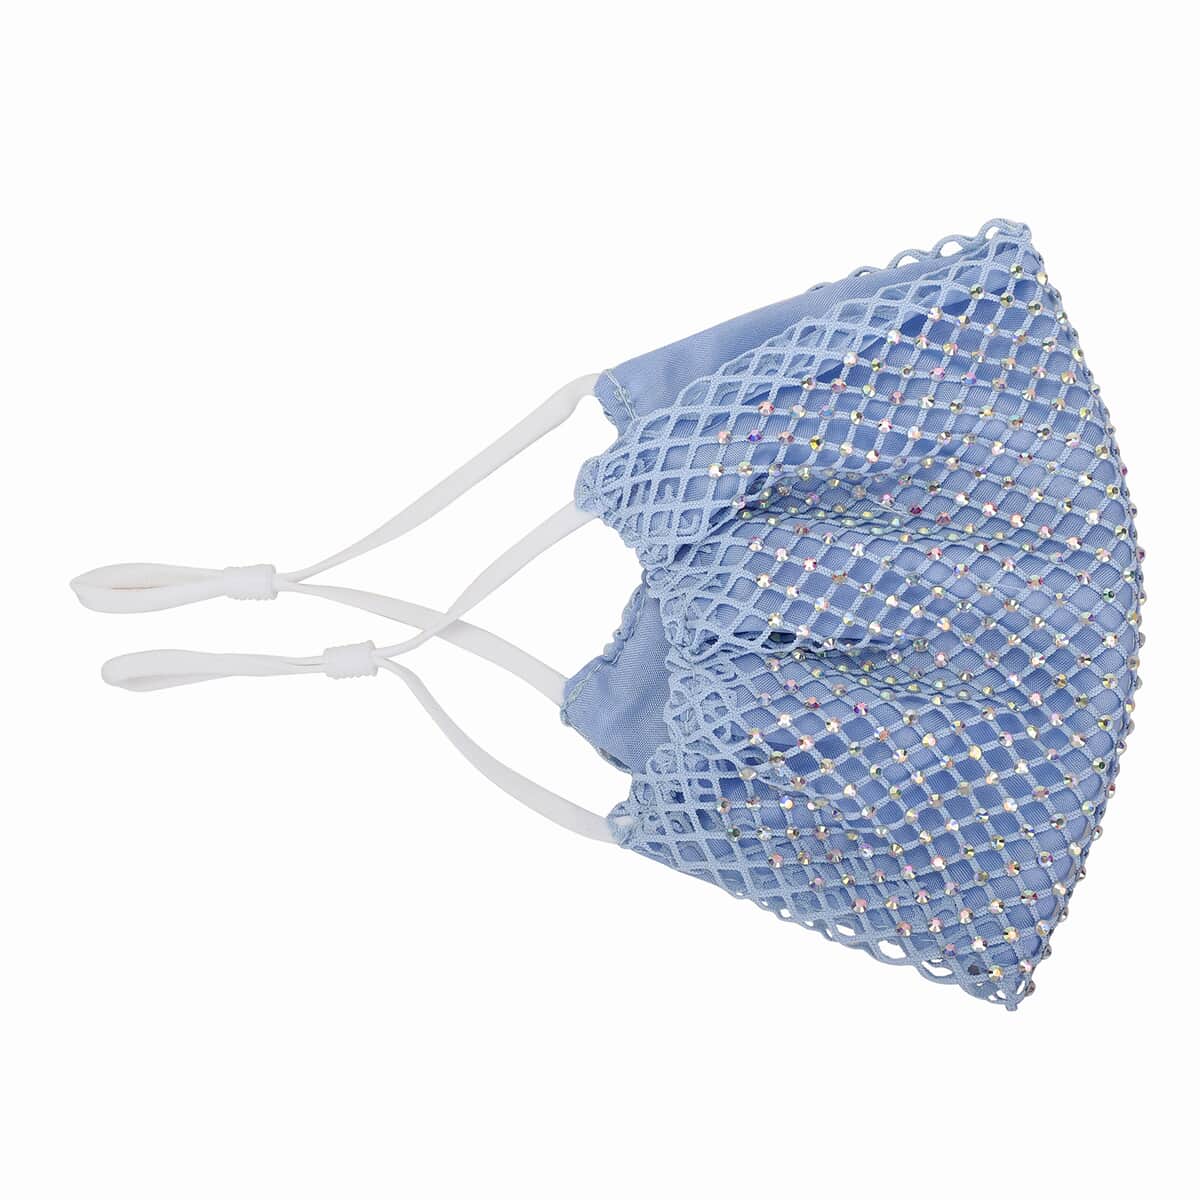 Light Blue Mesh with Sparkling Color Crystal Rhinestones 2 Ply Fashion Mask (Non-Returnable) image number 1